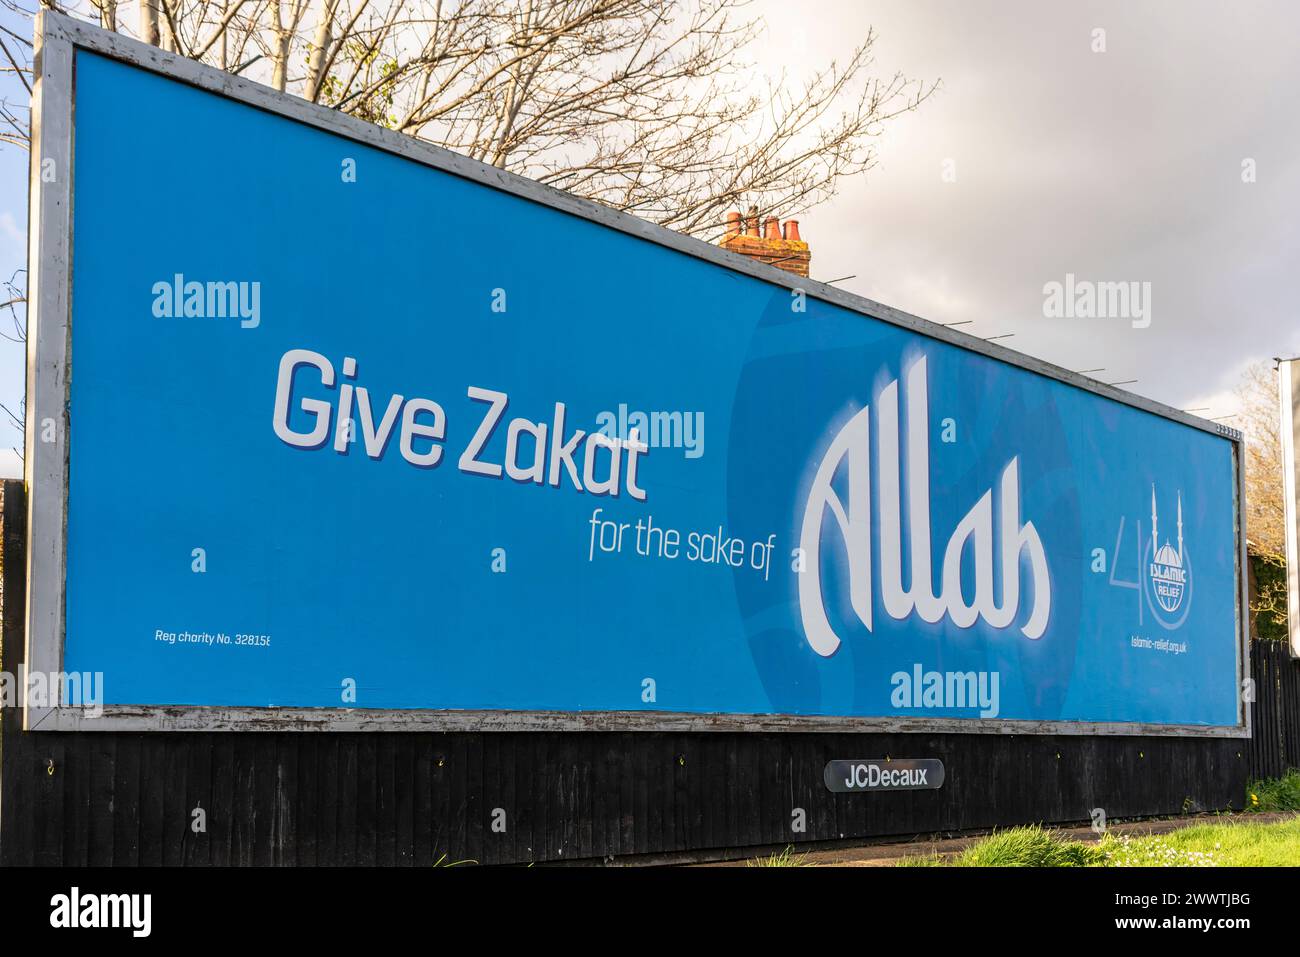 Billboard poster advertising for the Islamic Relief charity to make / give a Zakat donation for the sake of Allah, Southampton, Hampshire, England, UK Stock Photo